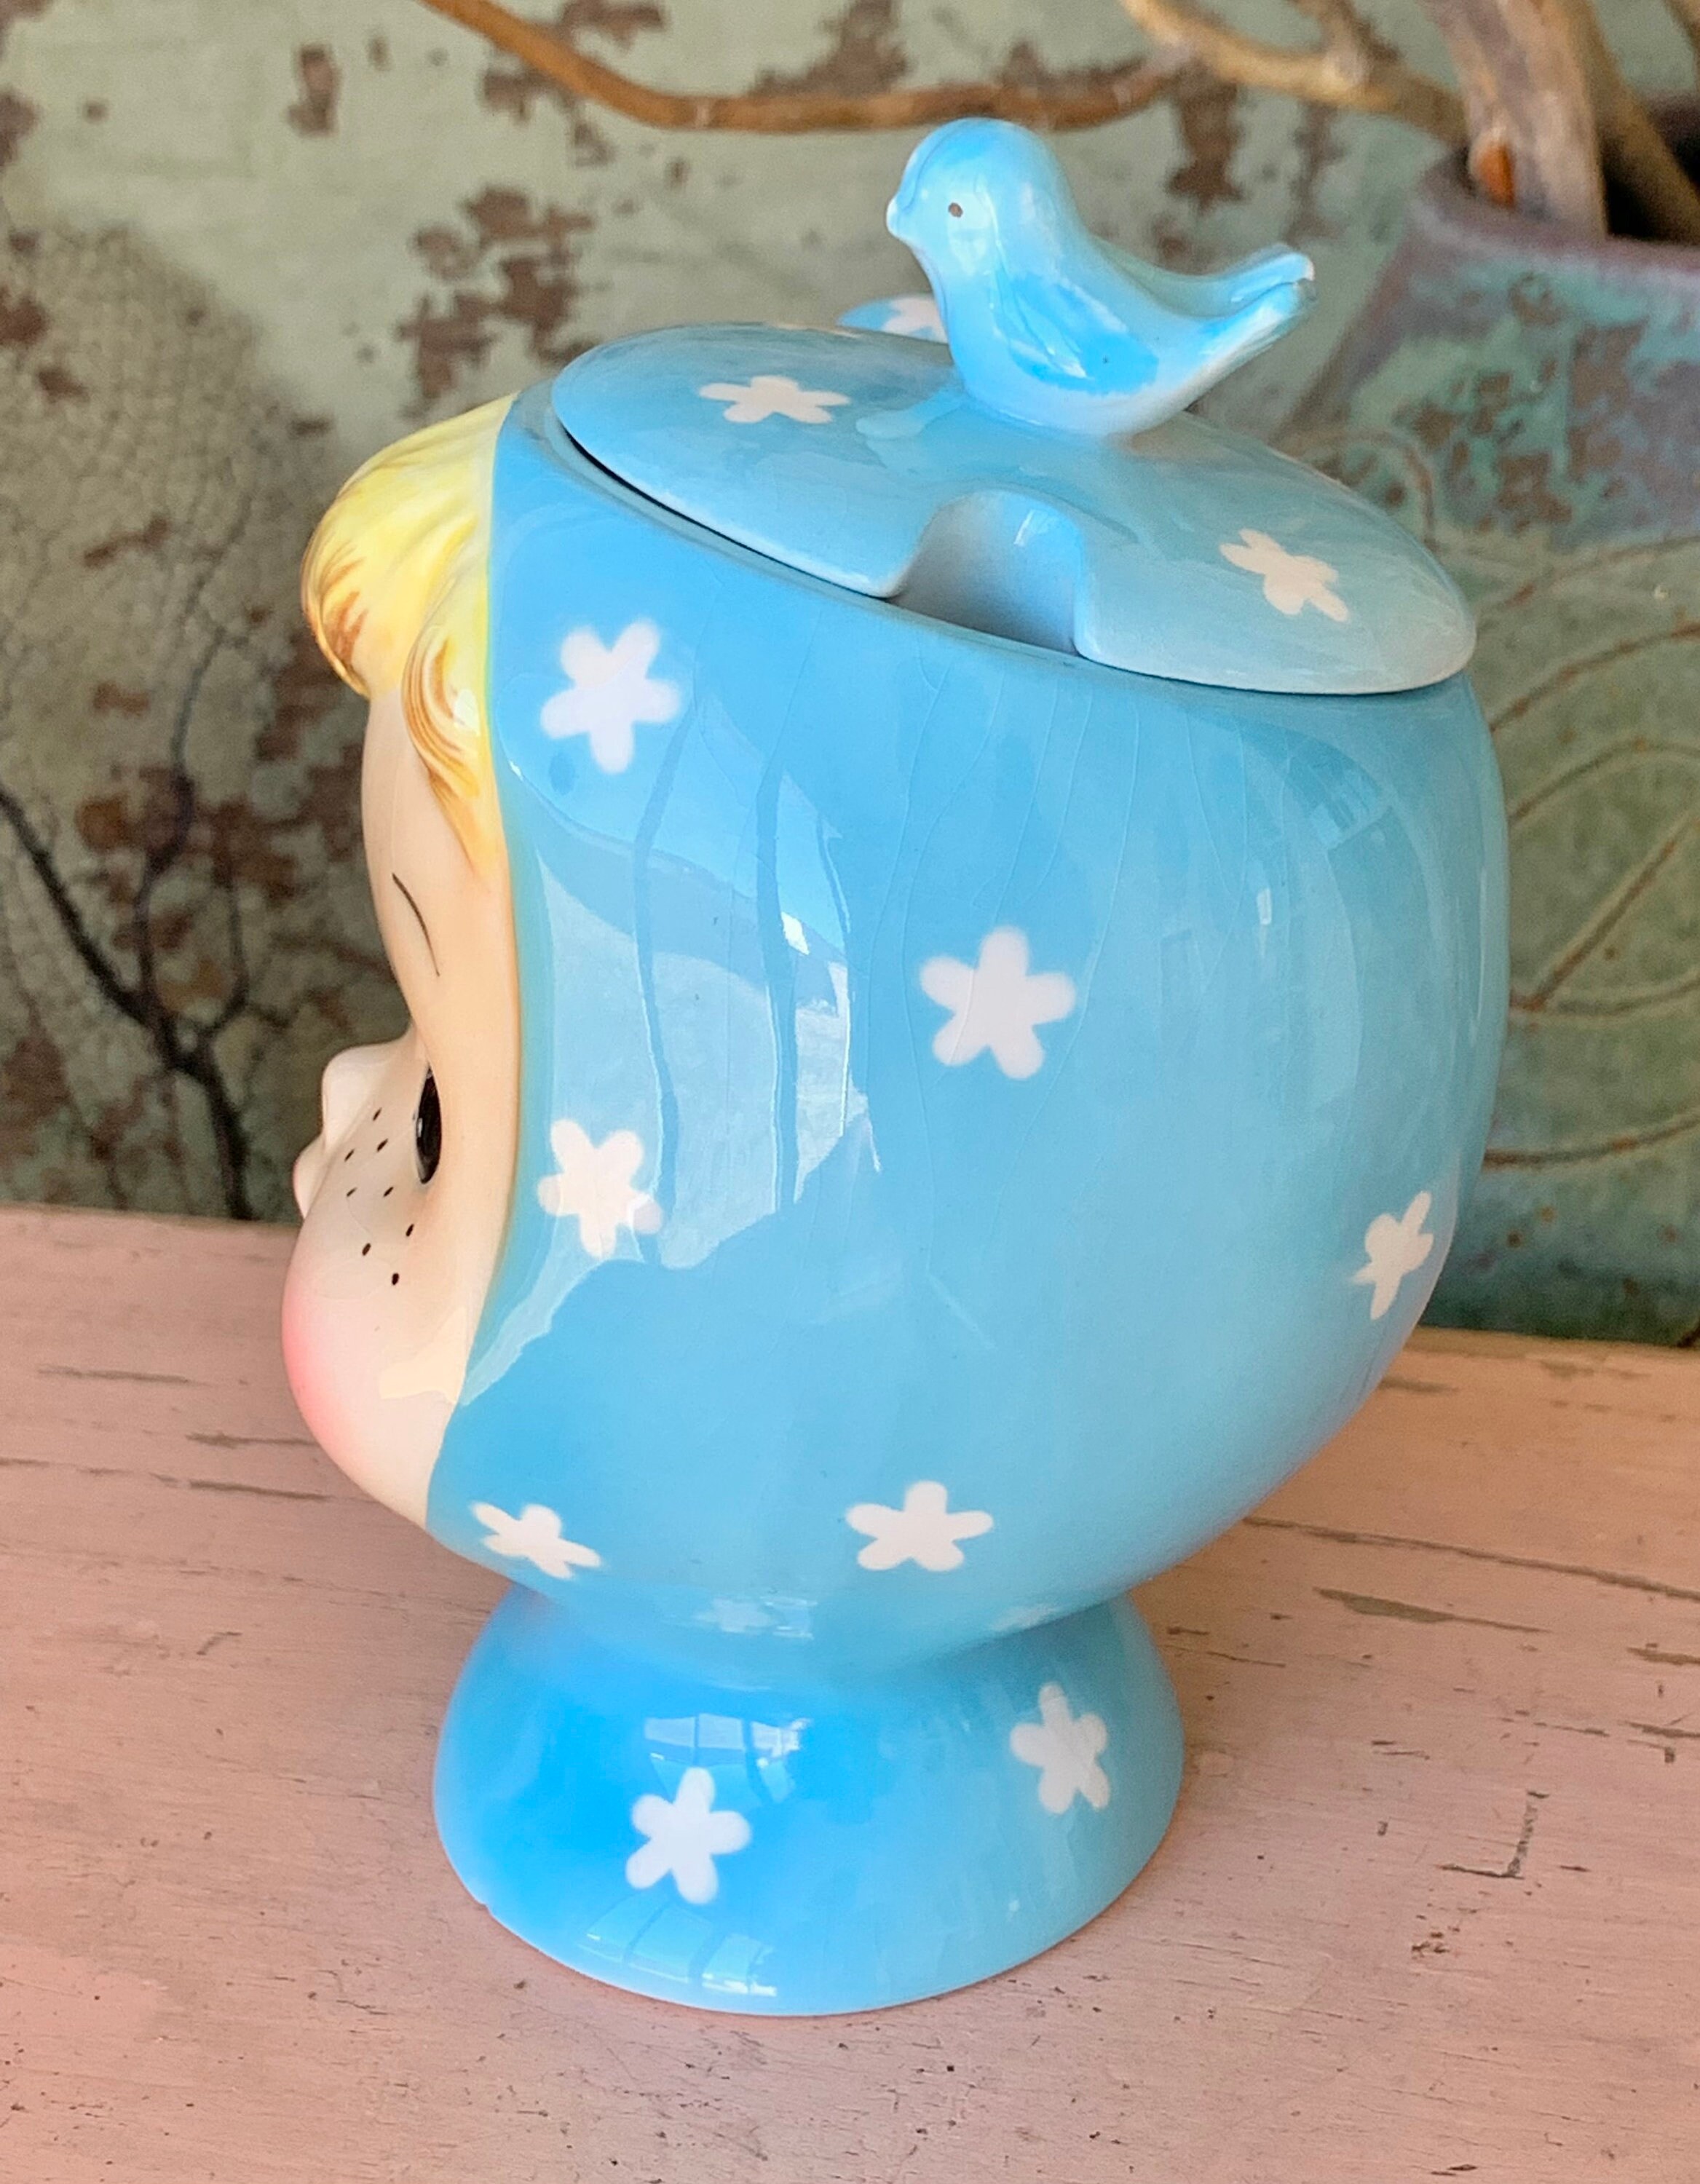 Vintage Miss Cutie Pie Creamer Small Retro Napco Pixie Girl Face Handle Cup  4 Inch Tall 